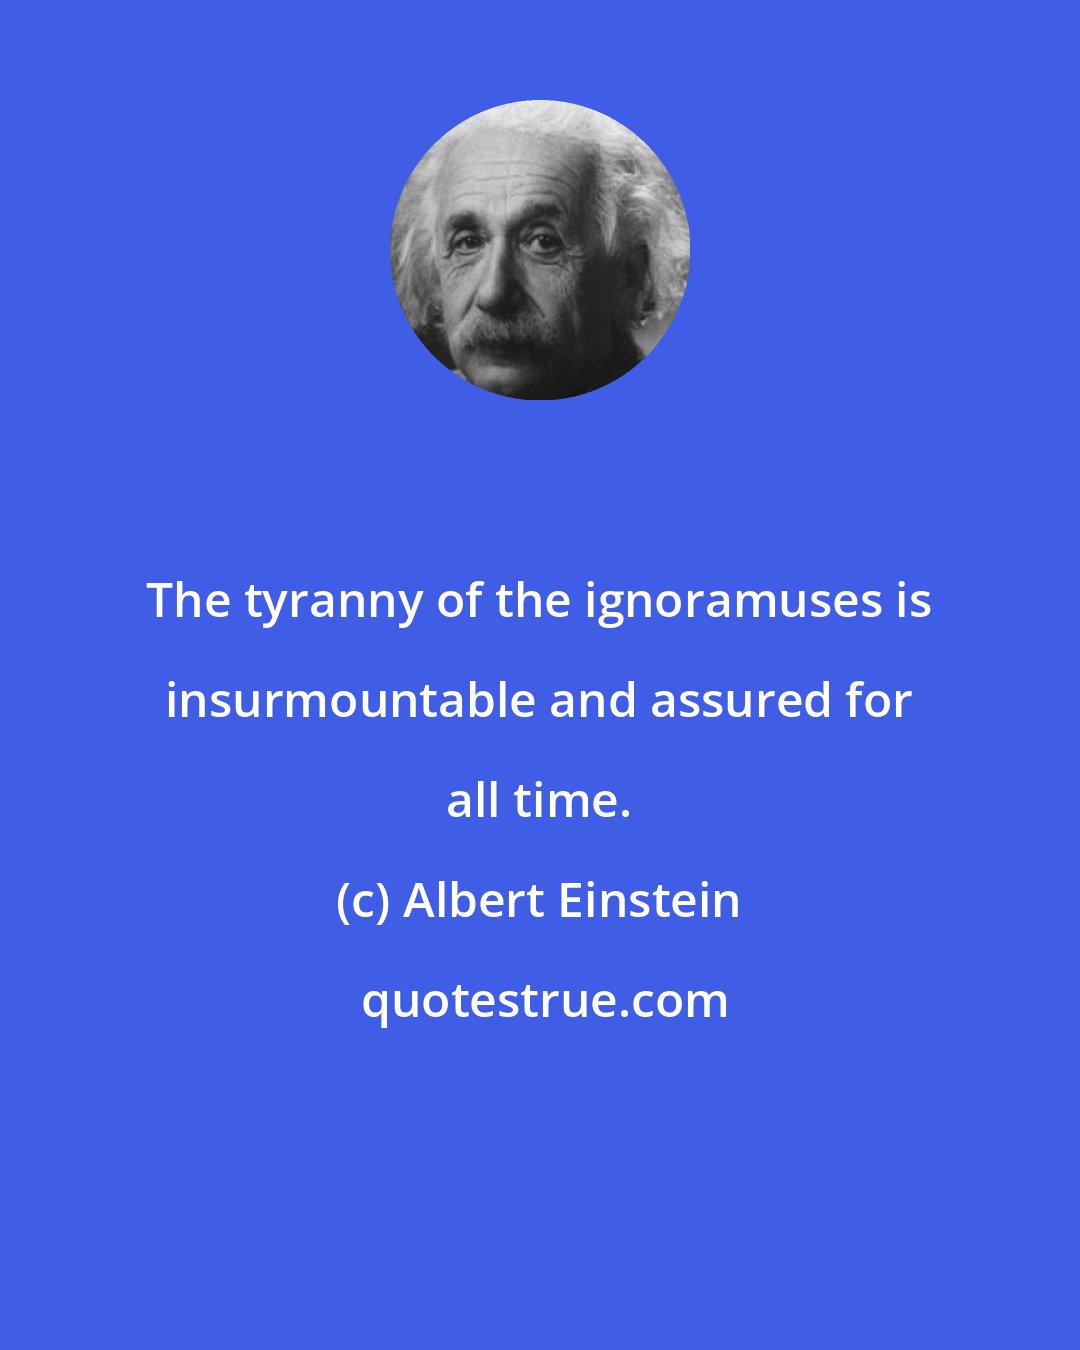 Albert Einstein: The tyranny of the ignoramuses is insurmountable and assured for all time.